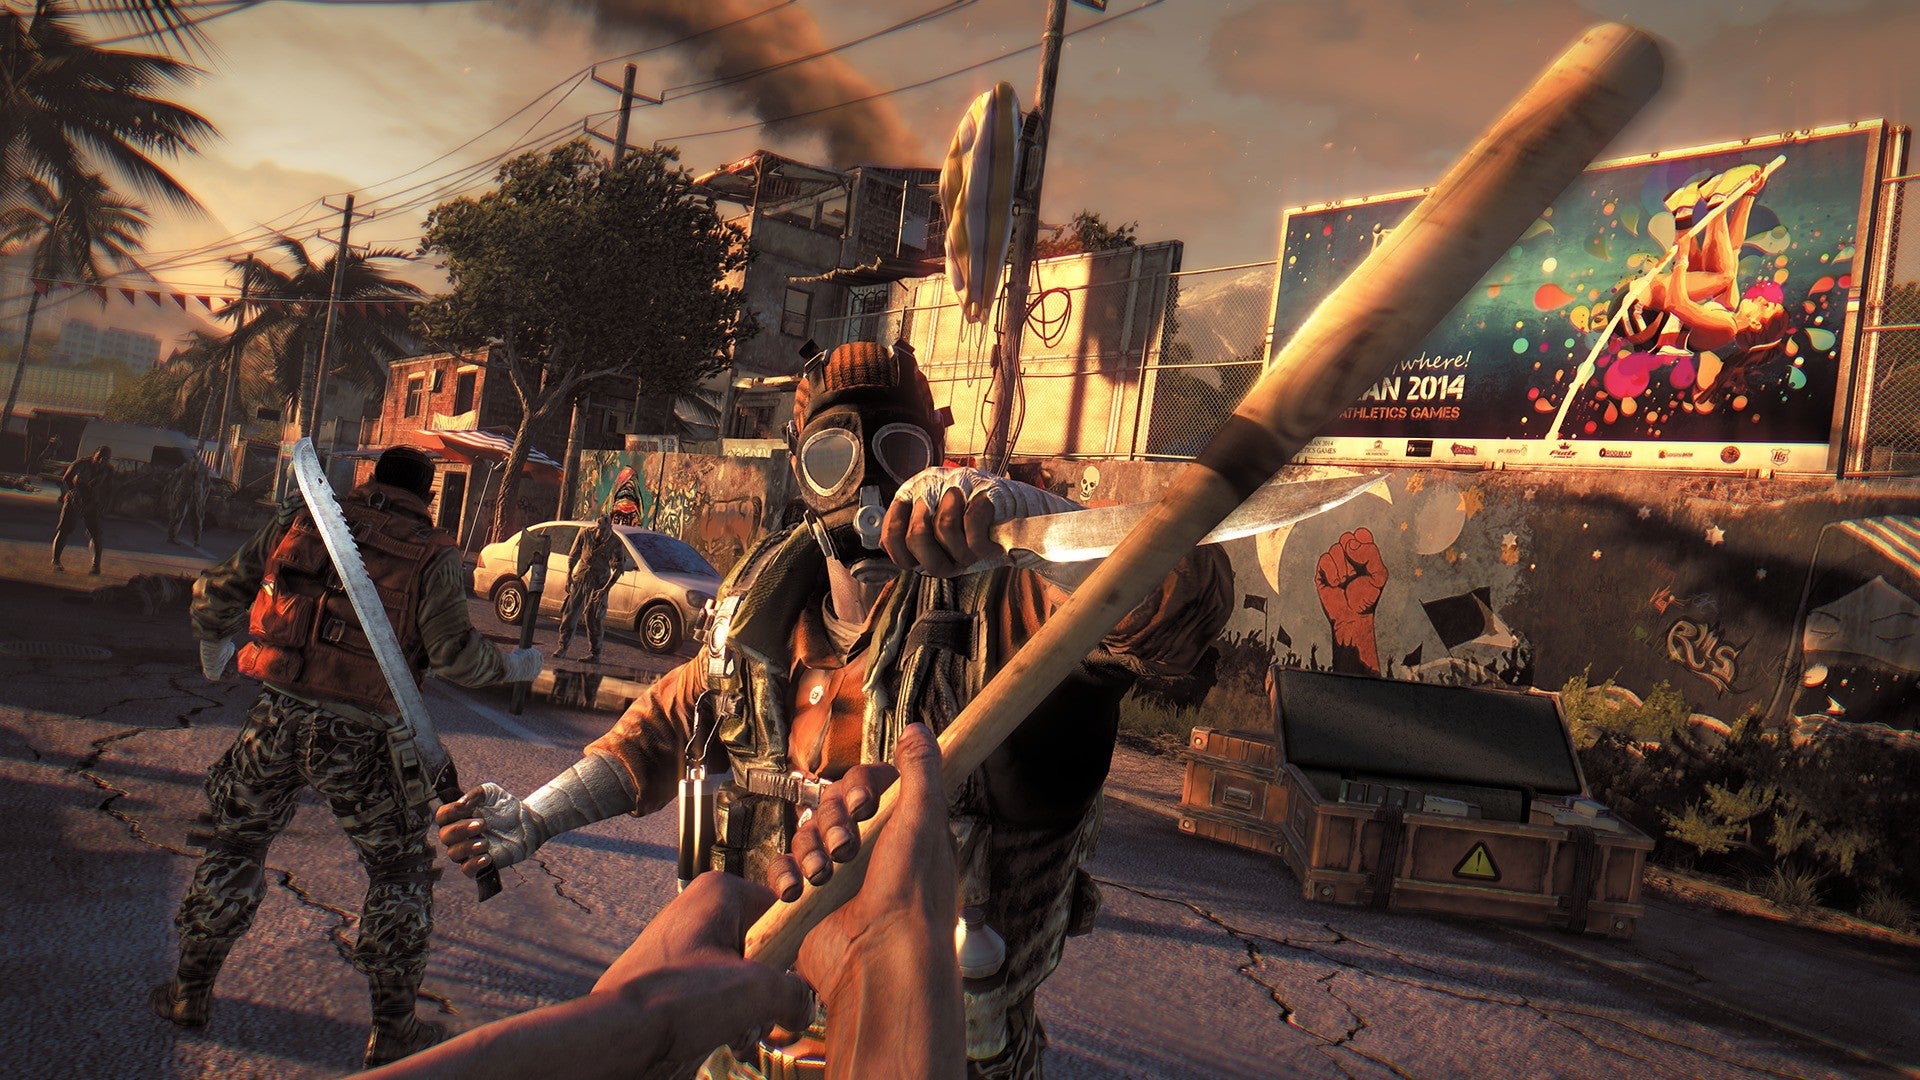 Does dying light coop work?